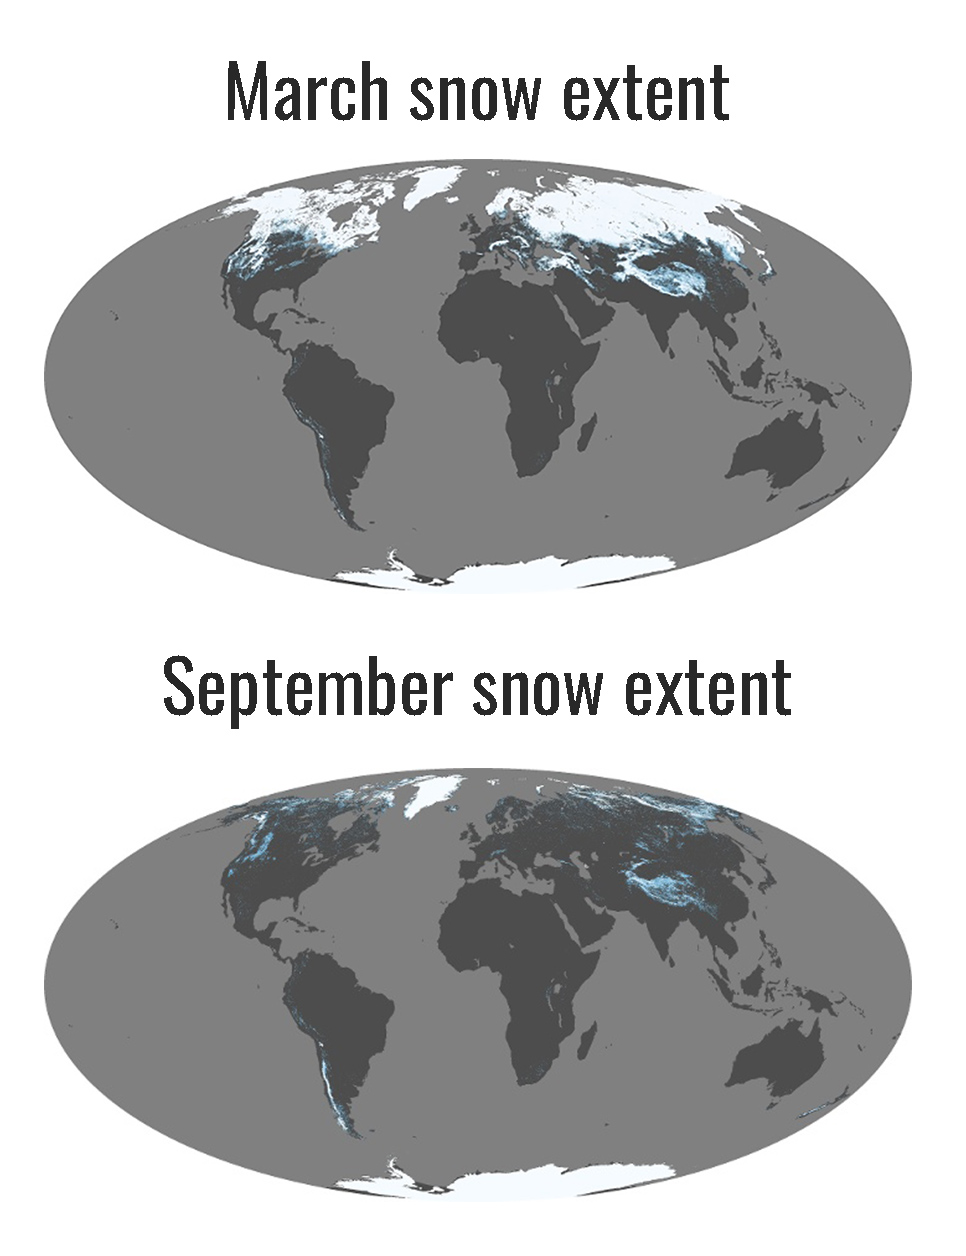 snow-extent-northern-hemisphere-highest-56-years-winter-cold-meanextent